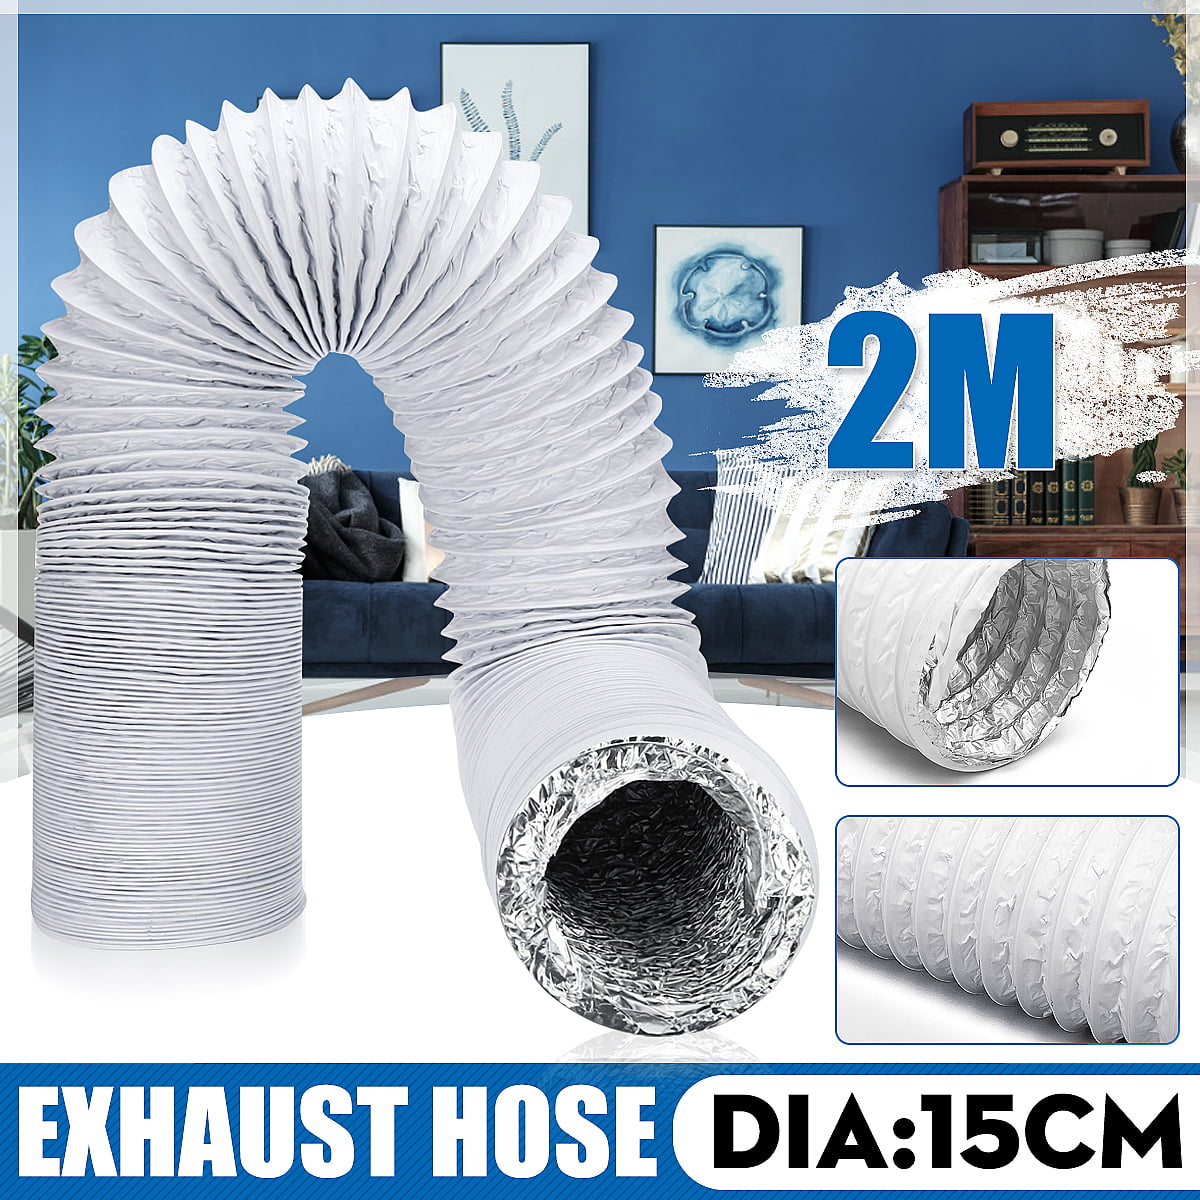 5 Inch Diameter Exhaust Hose Air Conditioner Hoses 20ft Length with High Flexibility for Draining Smoke Moisture Dust Etc Black